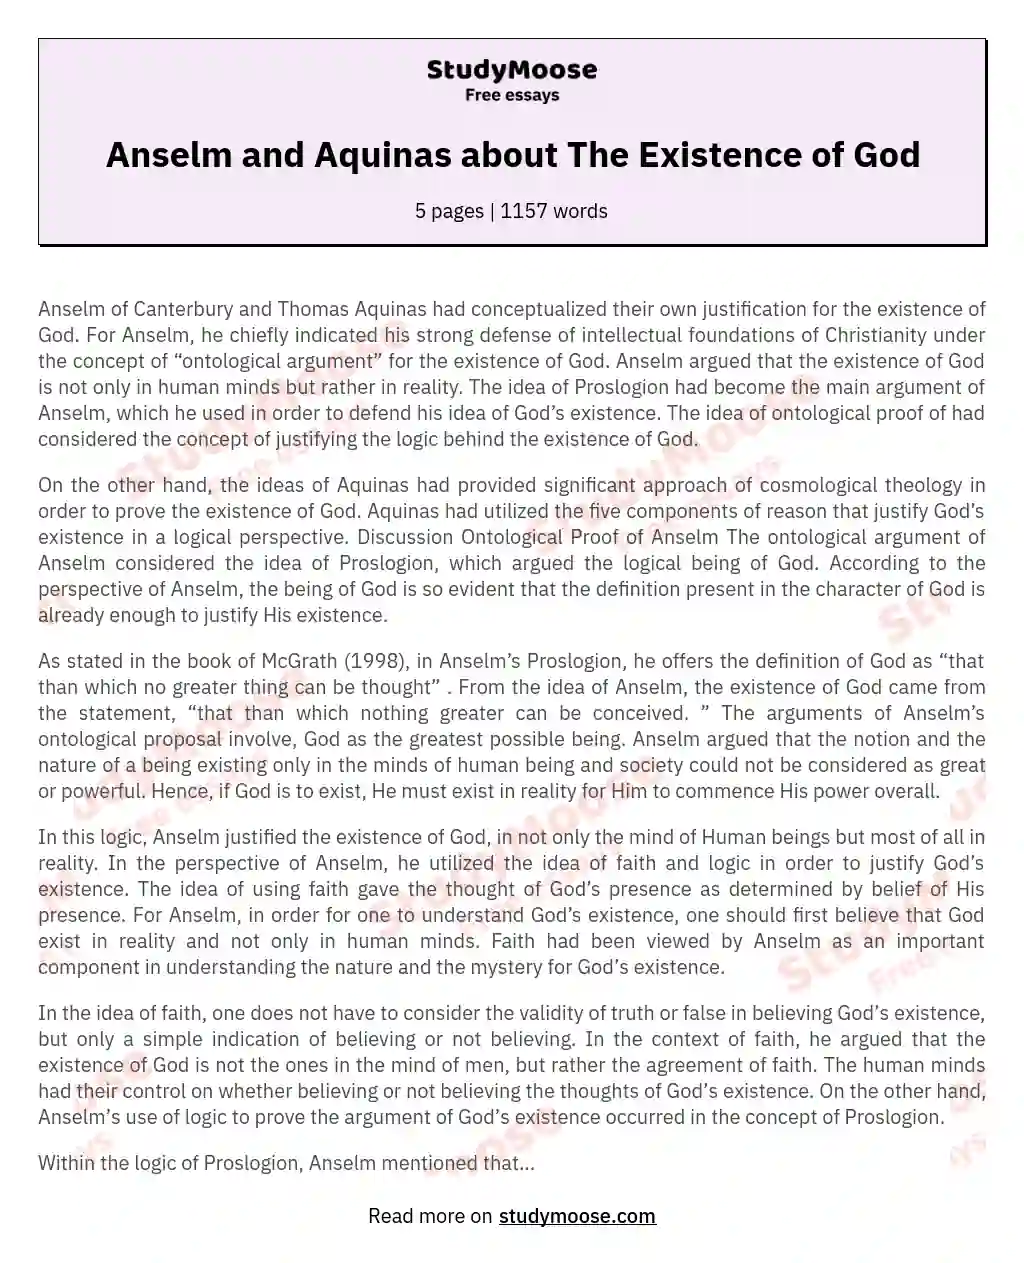 Anselm and Aquinas about The Existence of God